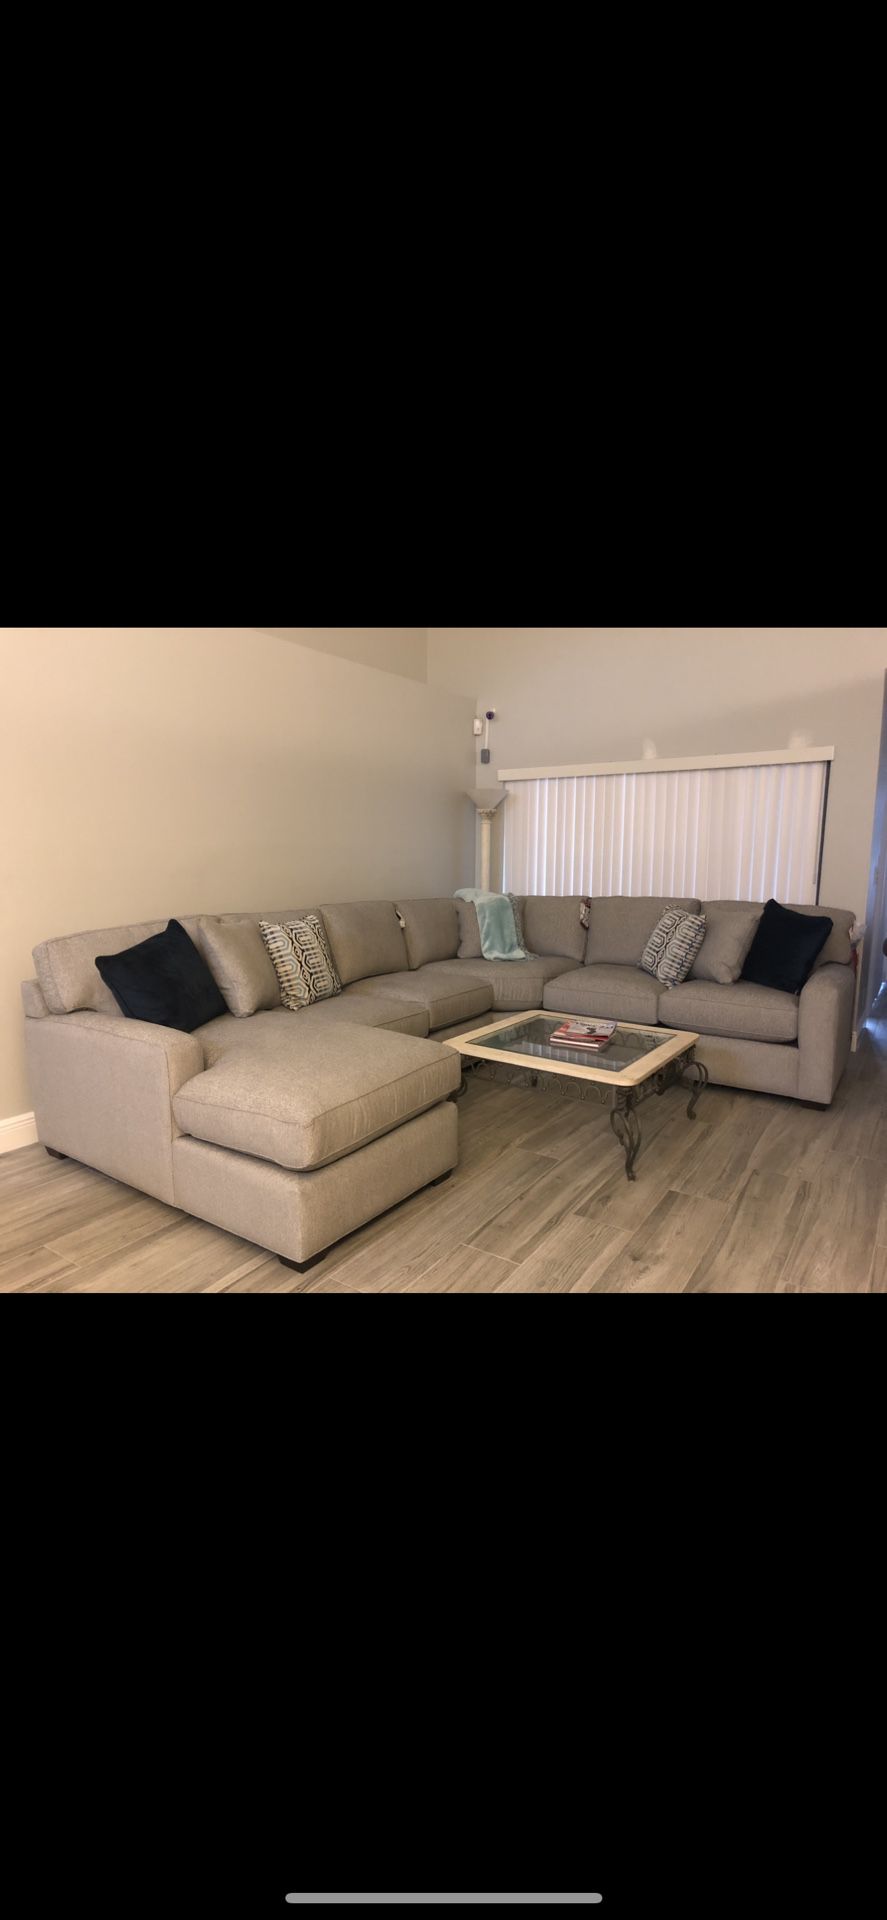 Gray Sofa Sectional Couch 